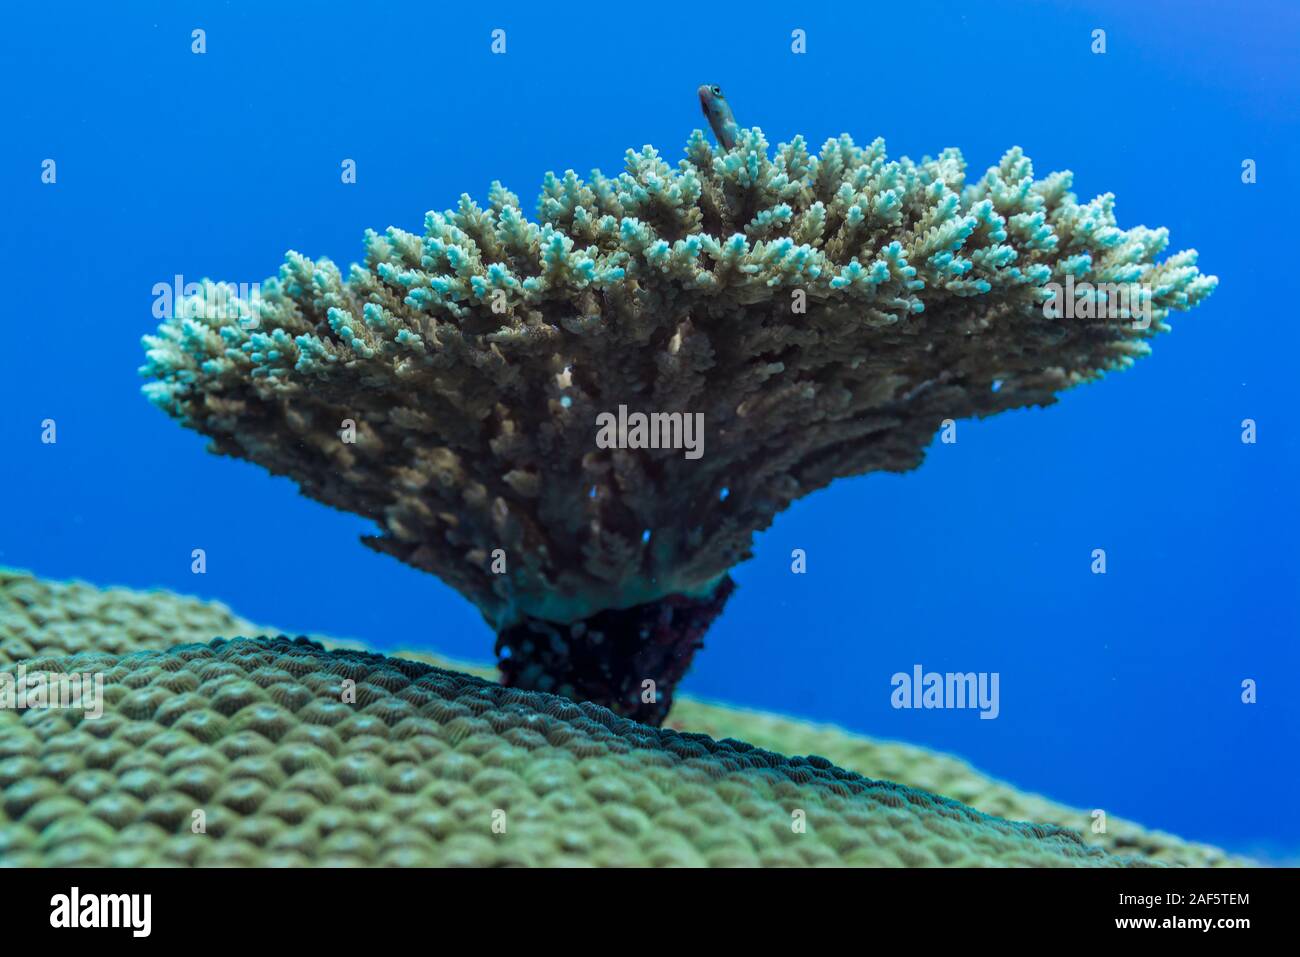 a small goby gazing blue world from the top of the tree-like shape coral Stock Photo